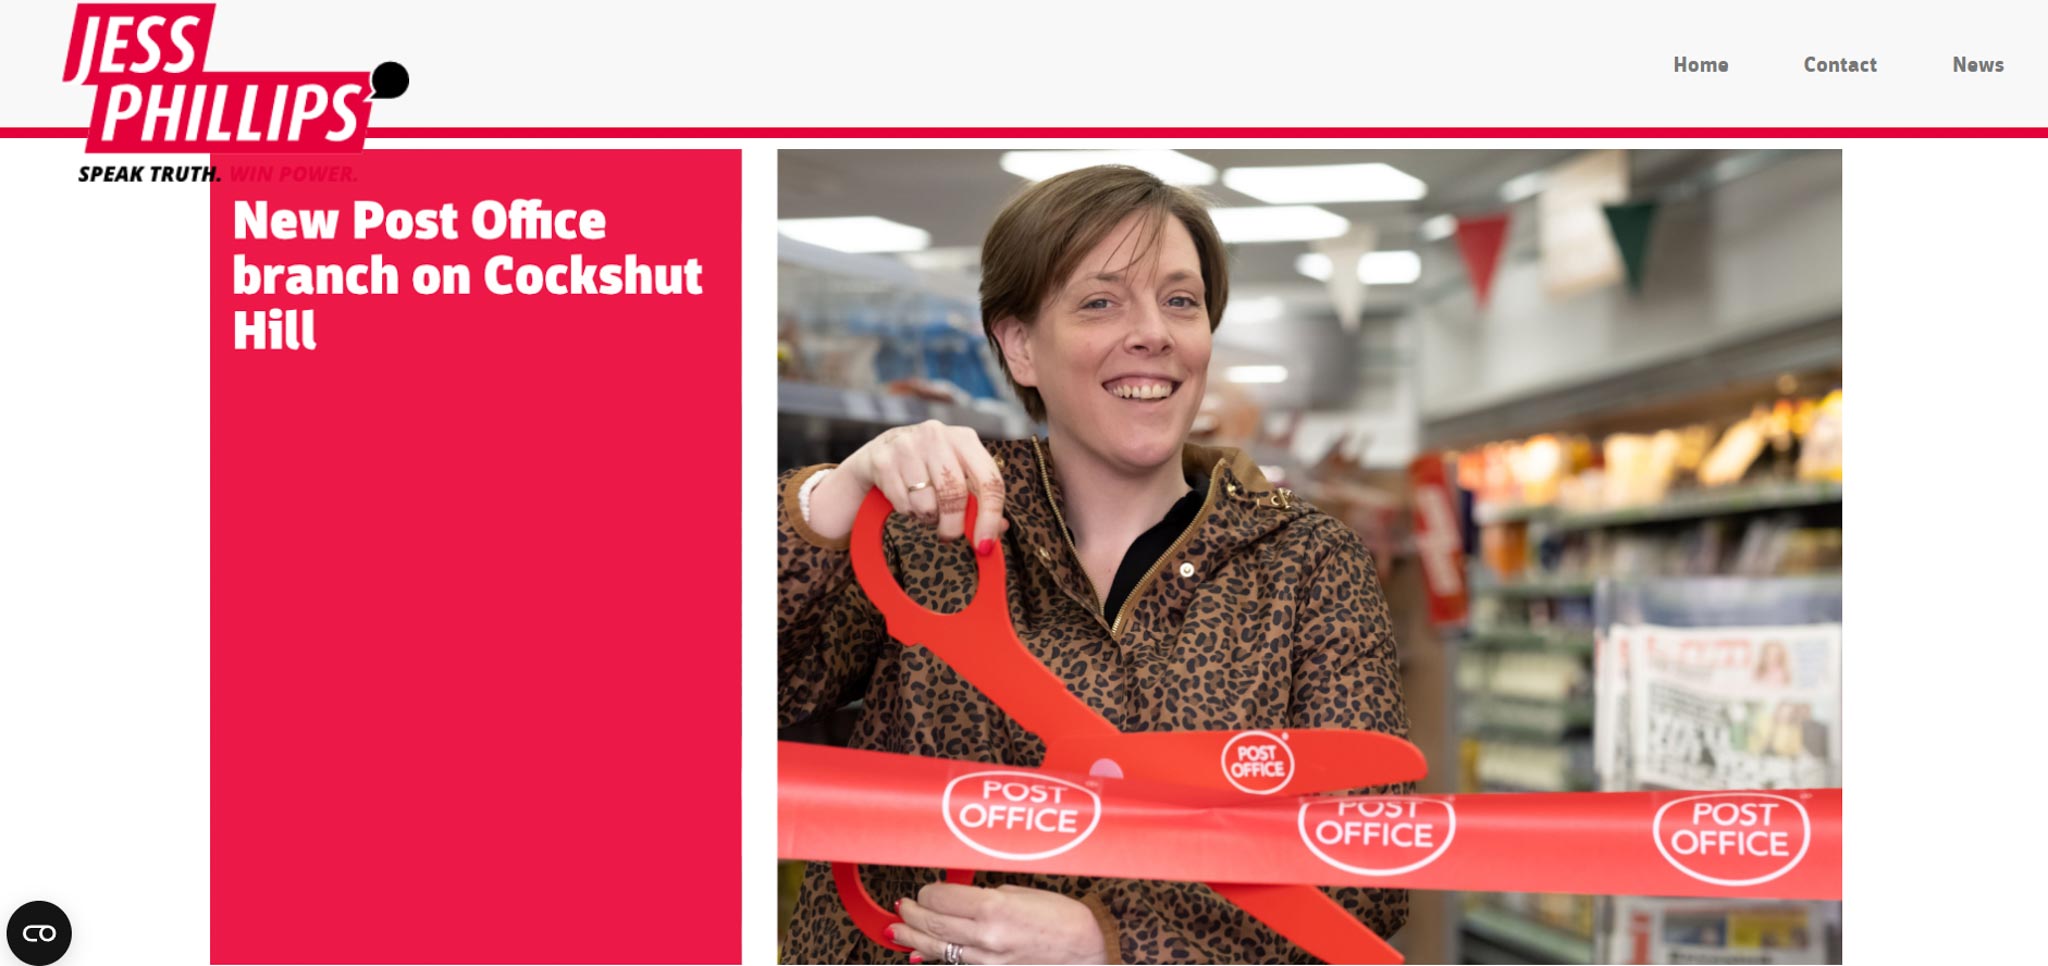 Jess Phillips officially opens a new Post Office branch in Birmingham